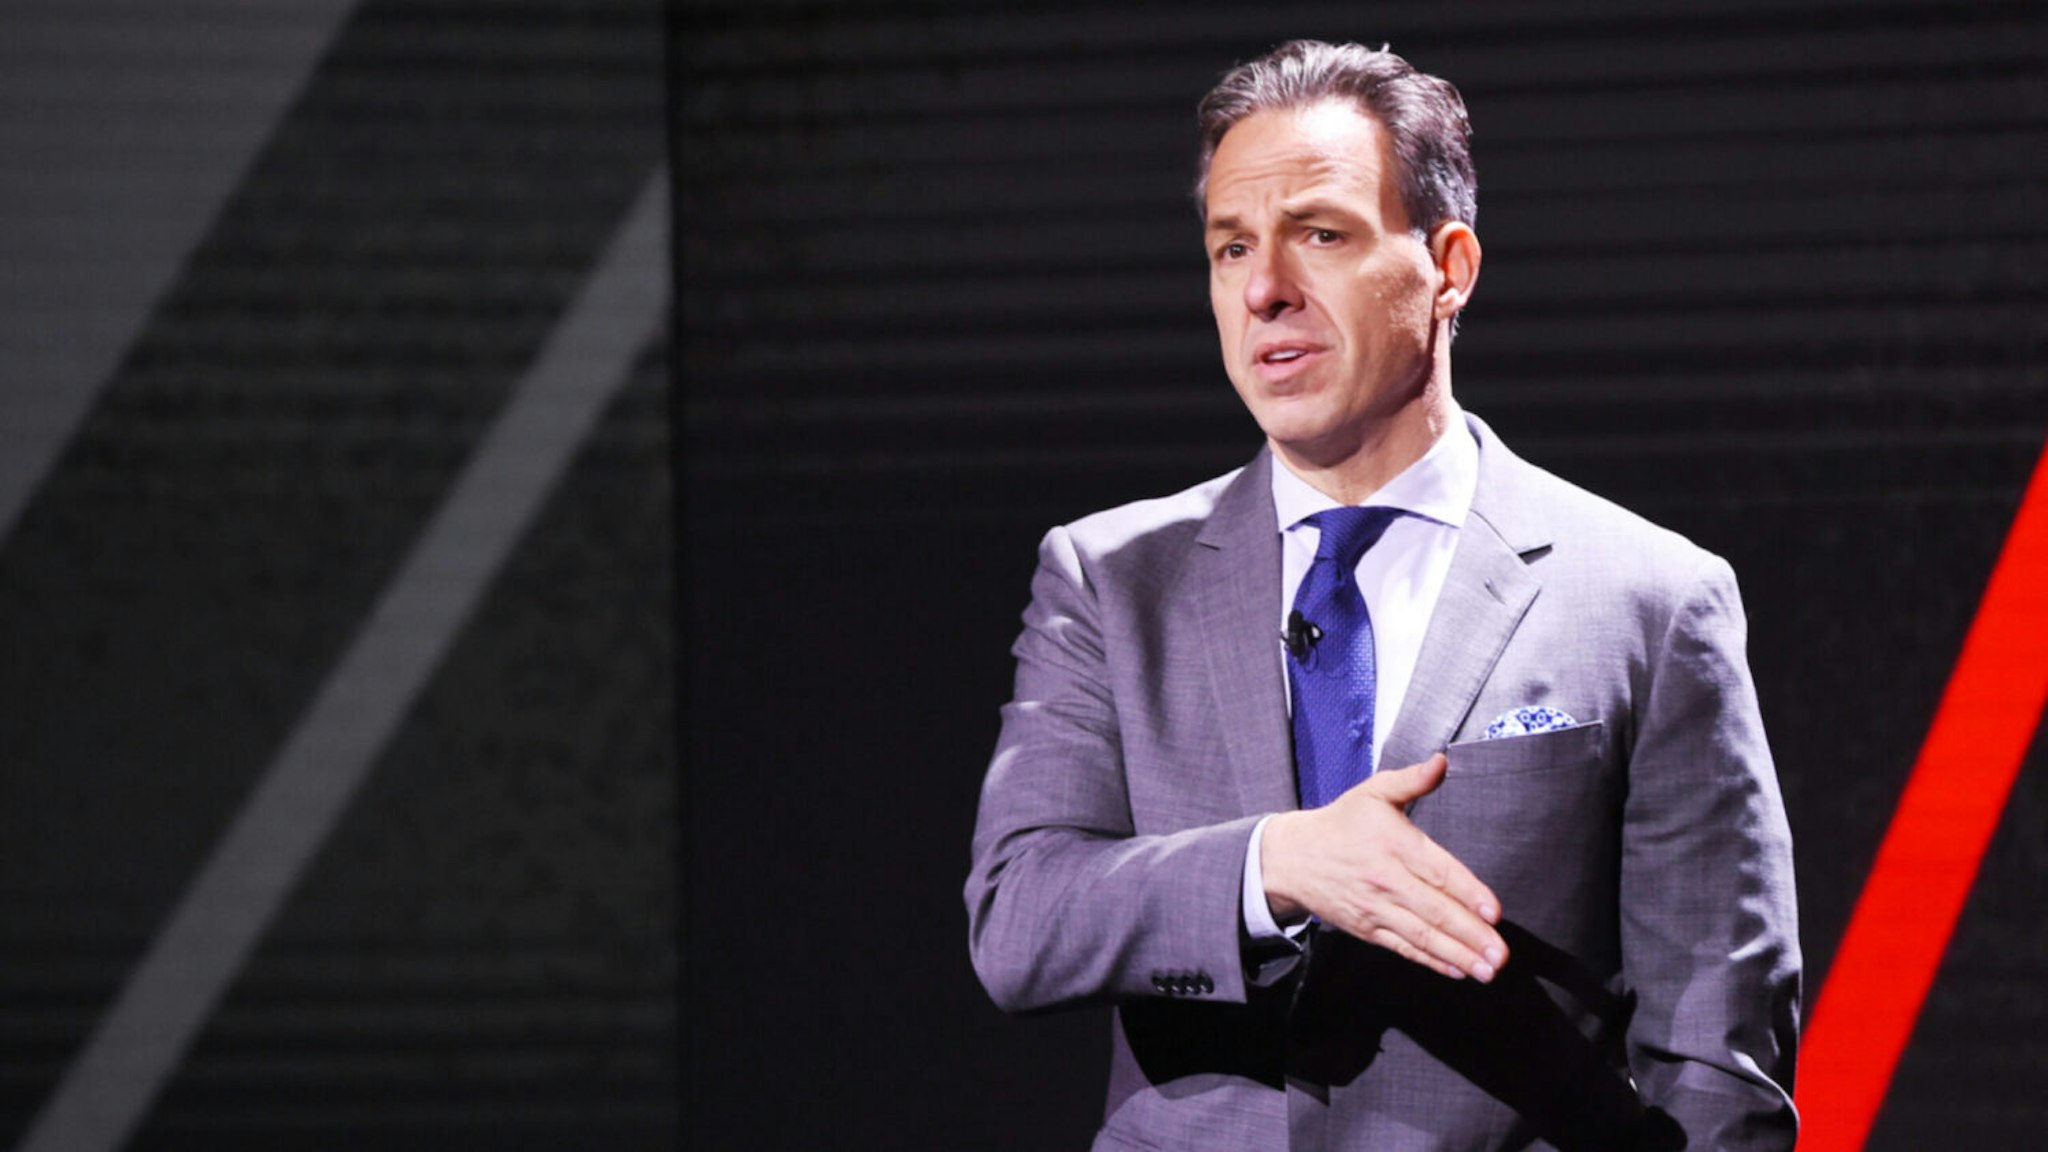 Jake Tapper of CNN’s The Lead with Jake Tapper and CNN’s State of the Union with Jake Tapper speaks onstage during the WarnerMedia Upfront 2019 show at The Theater at Madison Square Garden on May 15, 2019 in New York City.